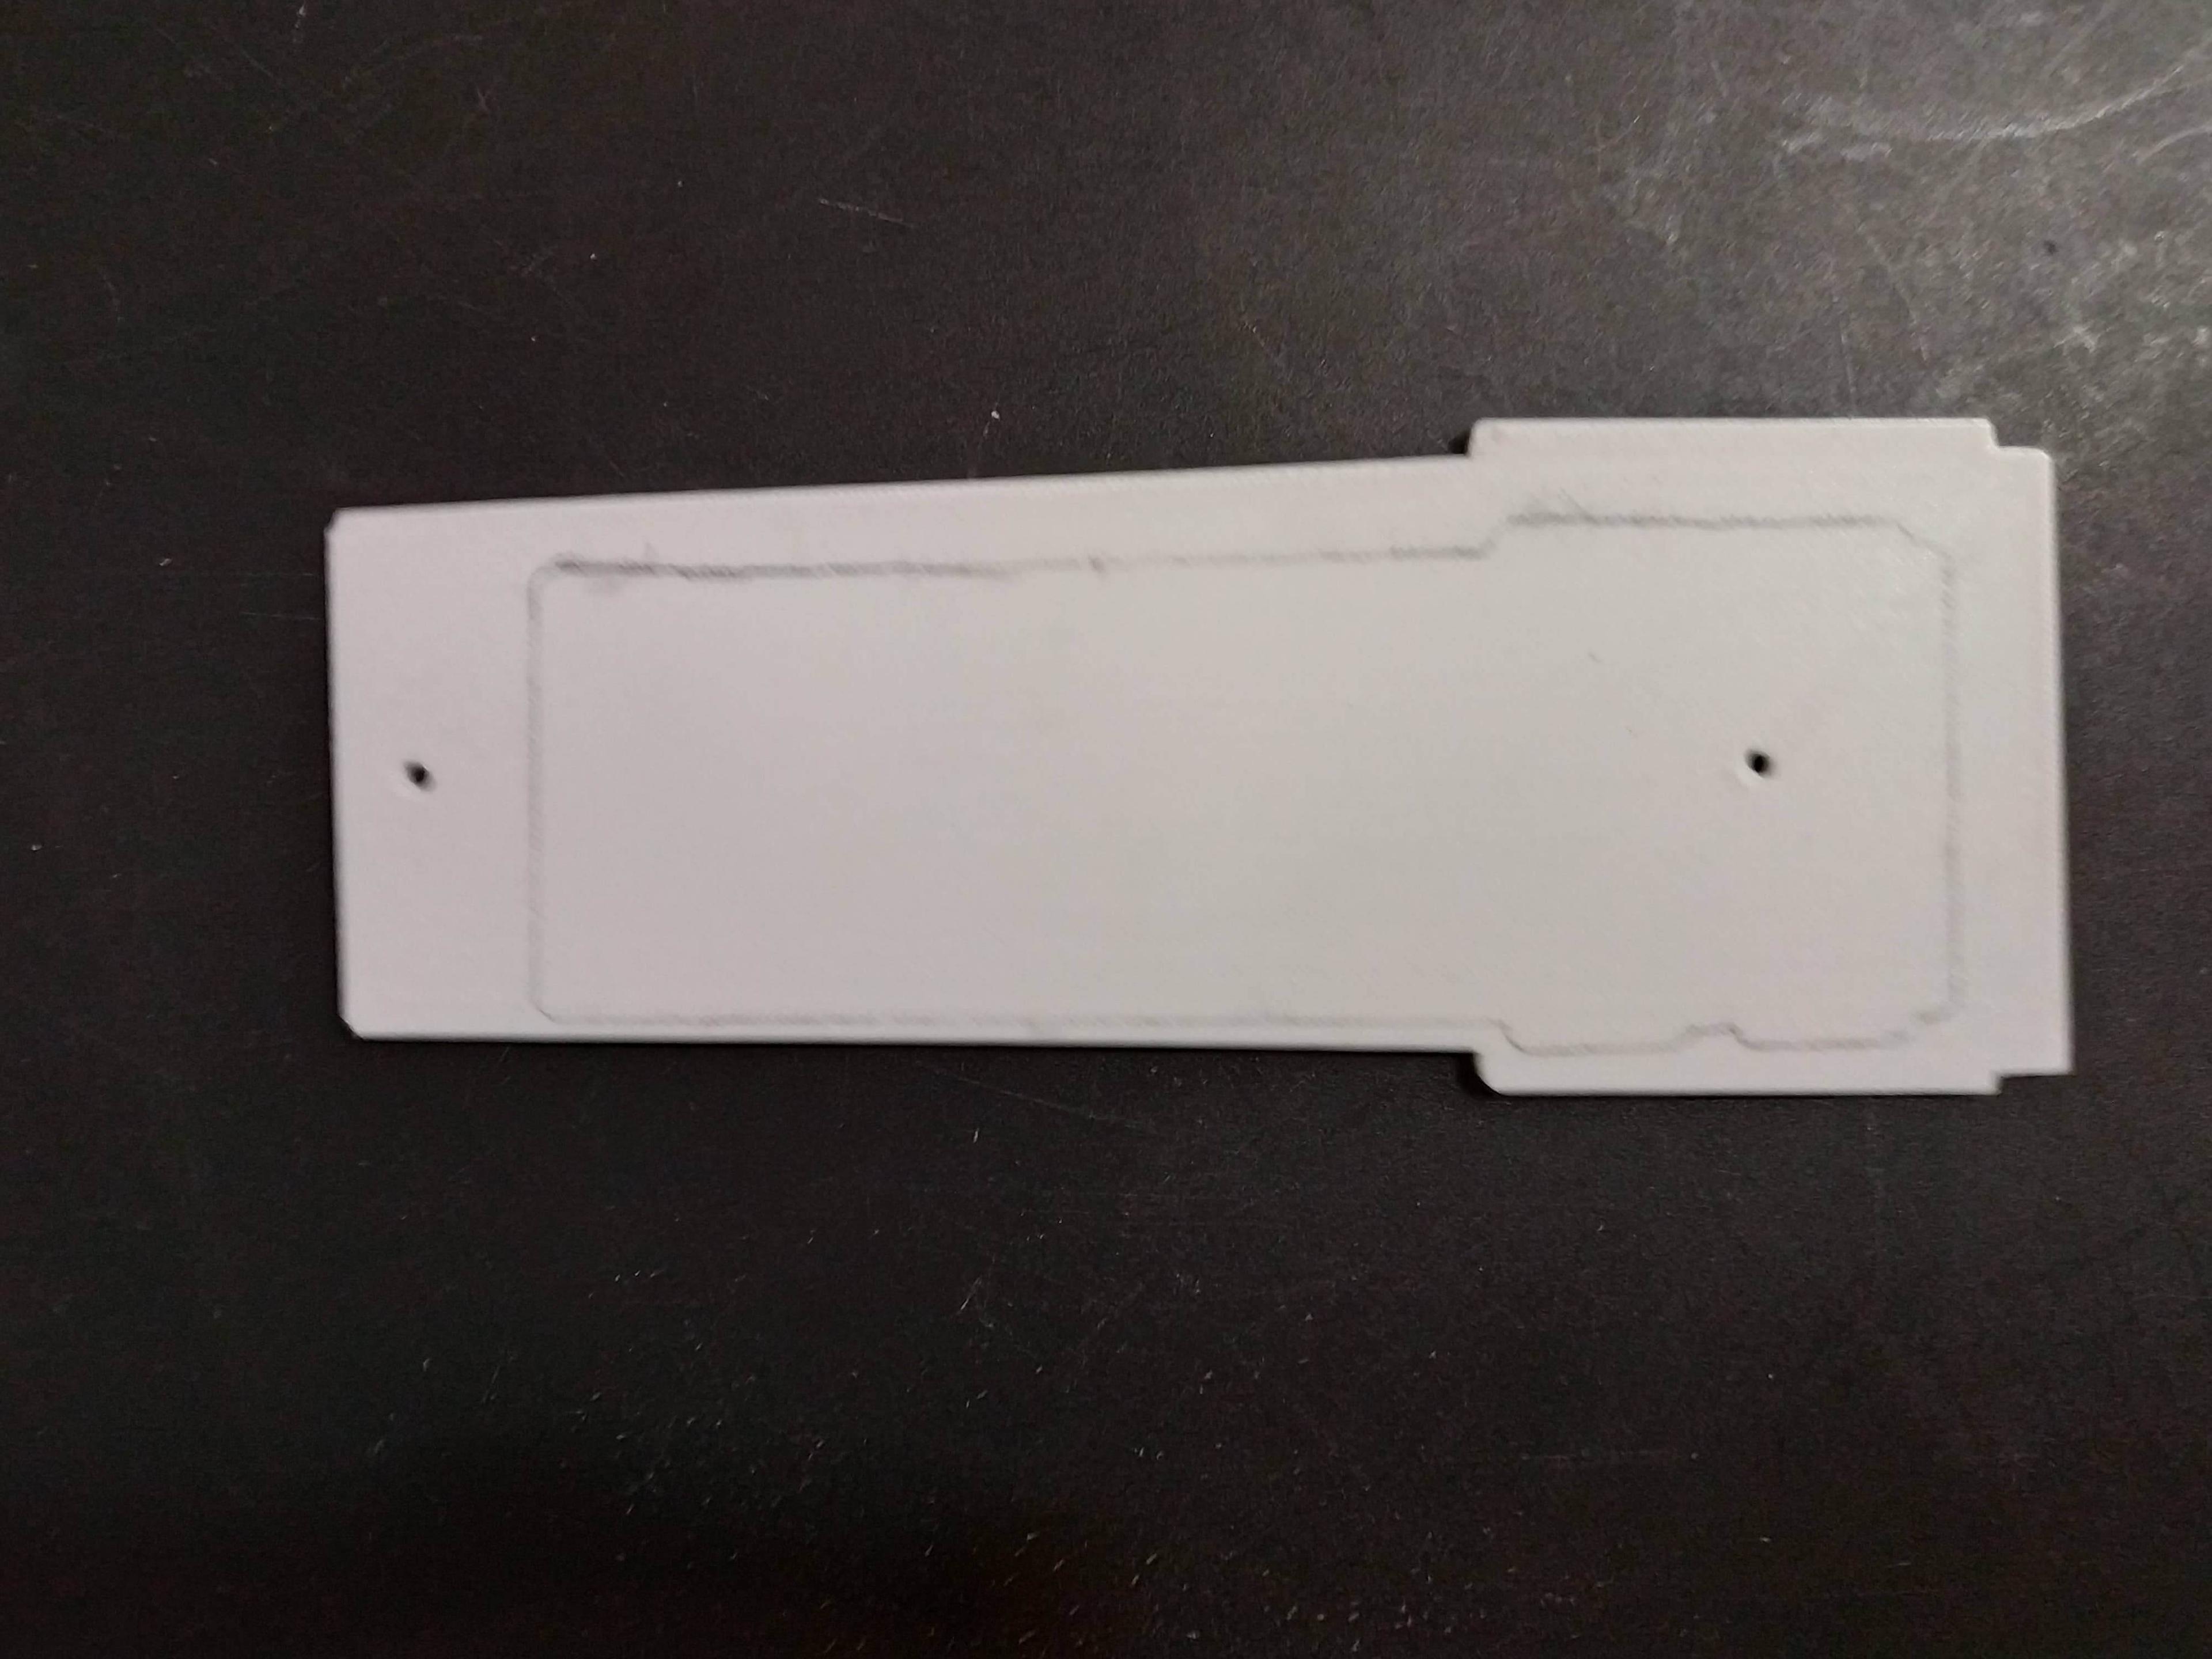 A white plastic part sits on a table. It has two holes for screws, and a pencil outline showing just how far off my design was from fitting